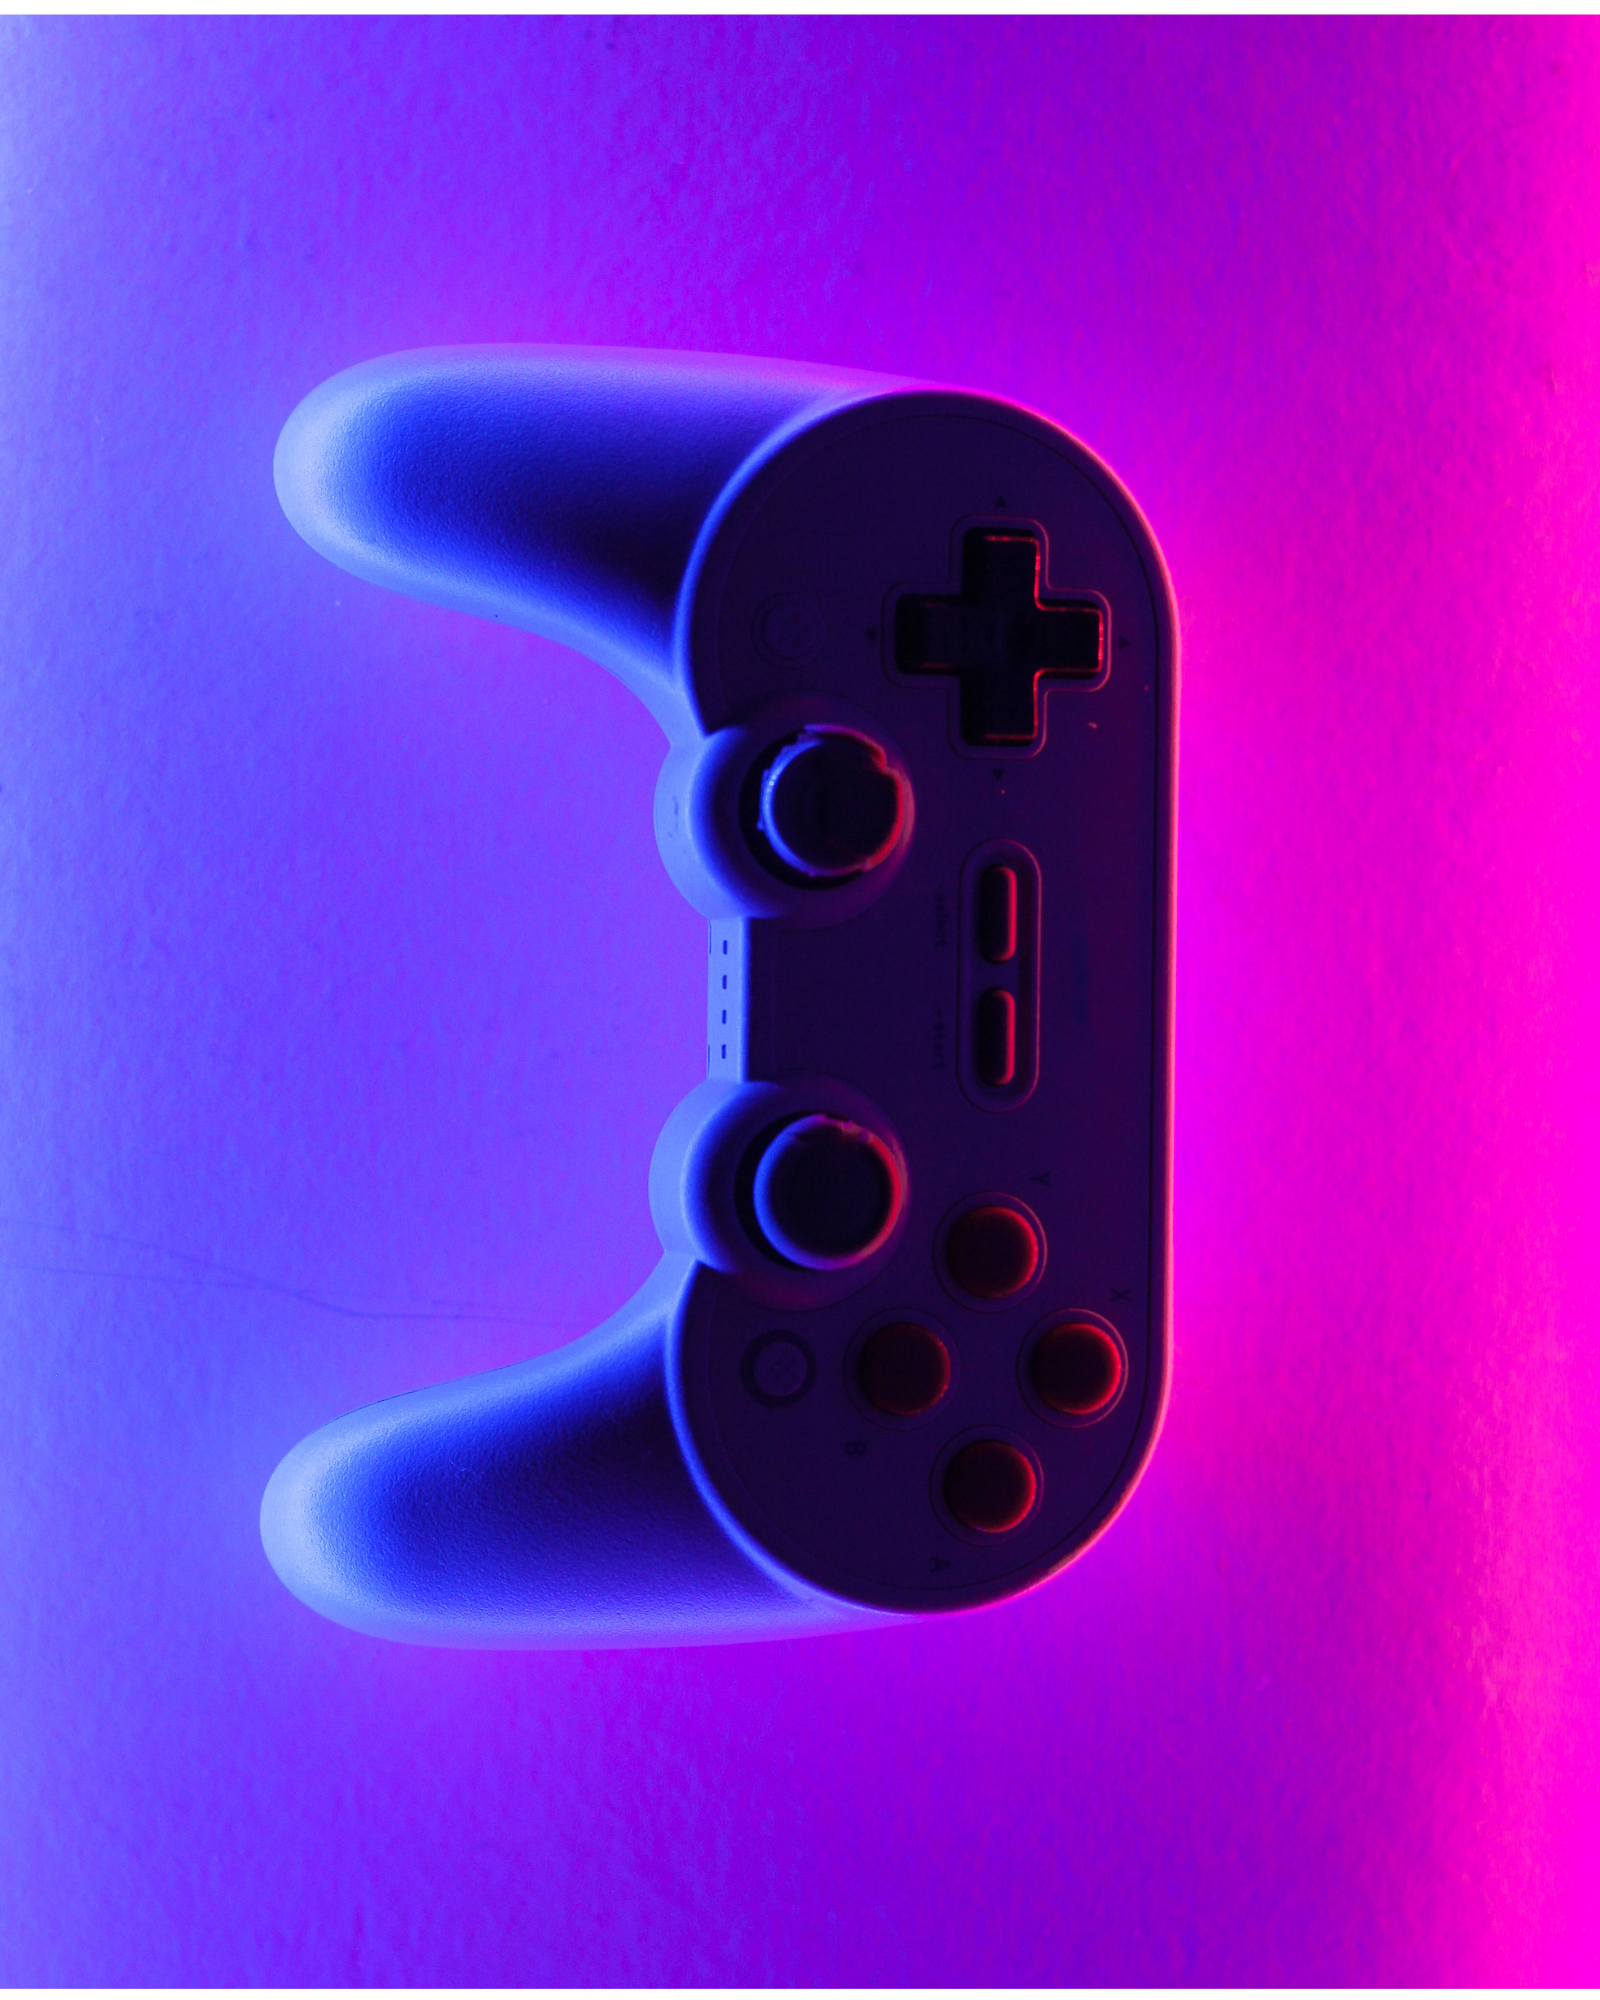  a modern gaming controller, prominently displayed against a dark background. The controller has an ergonomic design with curves for comfortable grip. It features standard buttons, analog sticks, and a directional pad, indicating it’s meant for comprehensive gameplay experiences. The object is illuminated by vibrant purple and blue lights from the sides, creating an aesthetic glow and emphasizing the controller’s shape. The background is dark which makes the colorful illumination stand out even more.